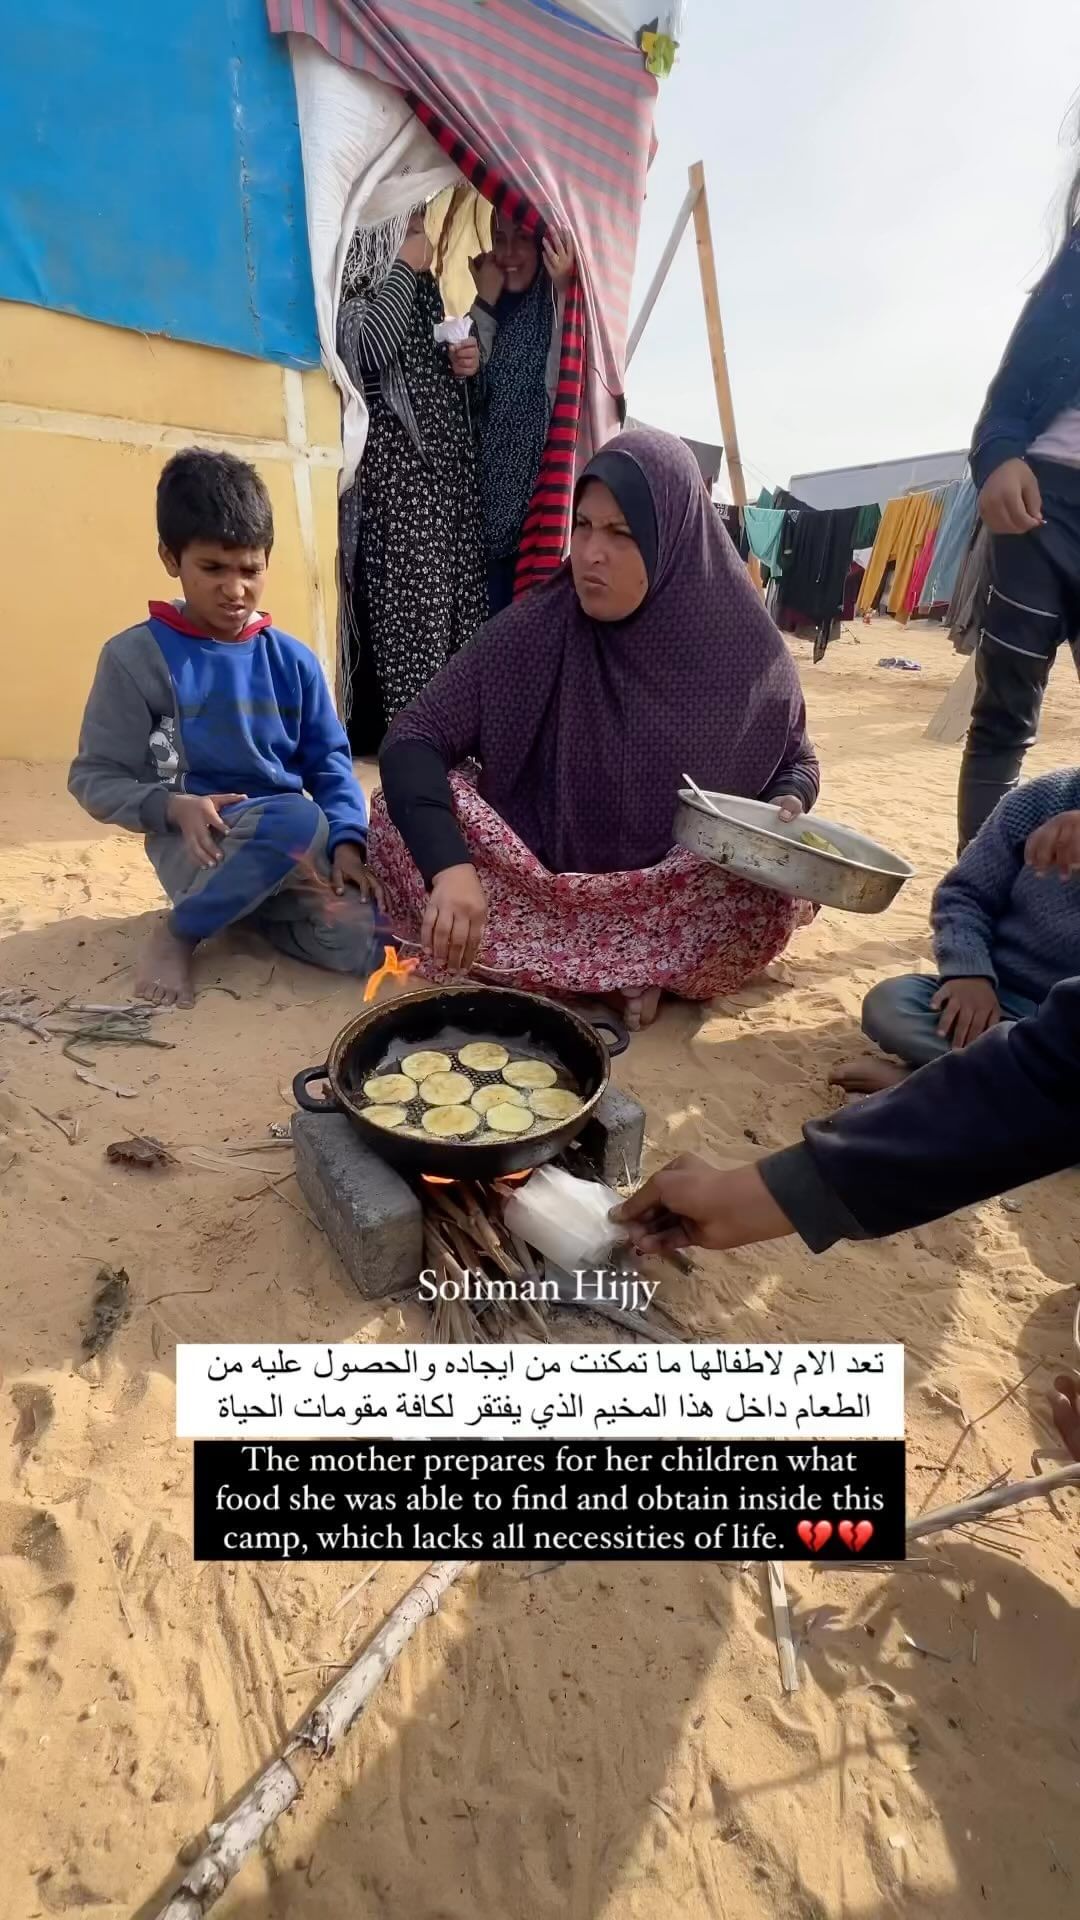 a-mother-prepares-food-for-her-children-in-one-the-displaced-civilians-camps-in-gaza-strip.-via-@solimanhijjy